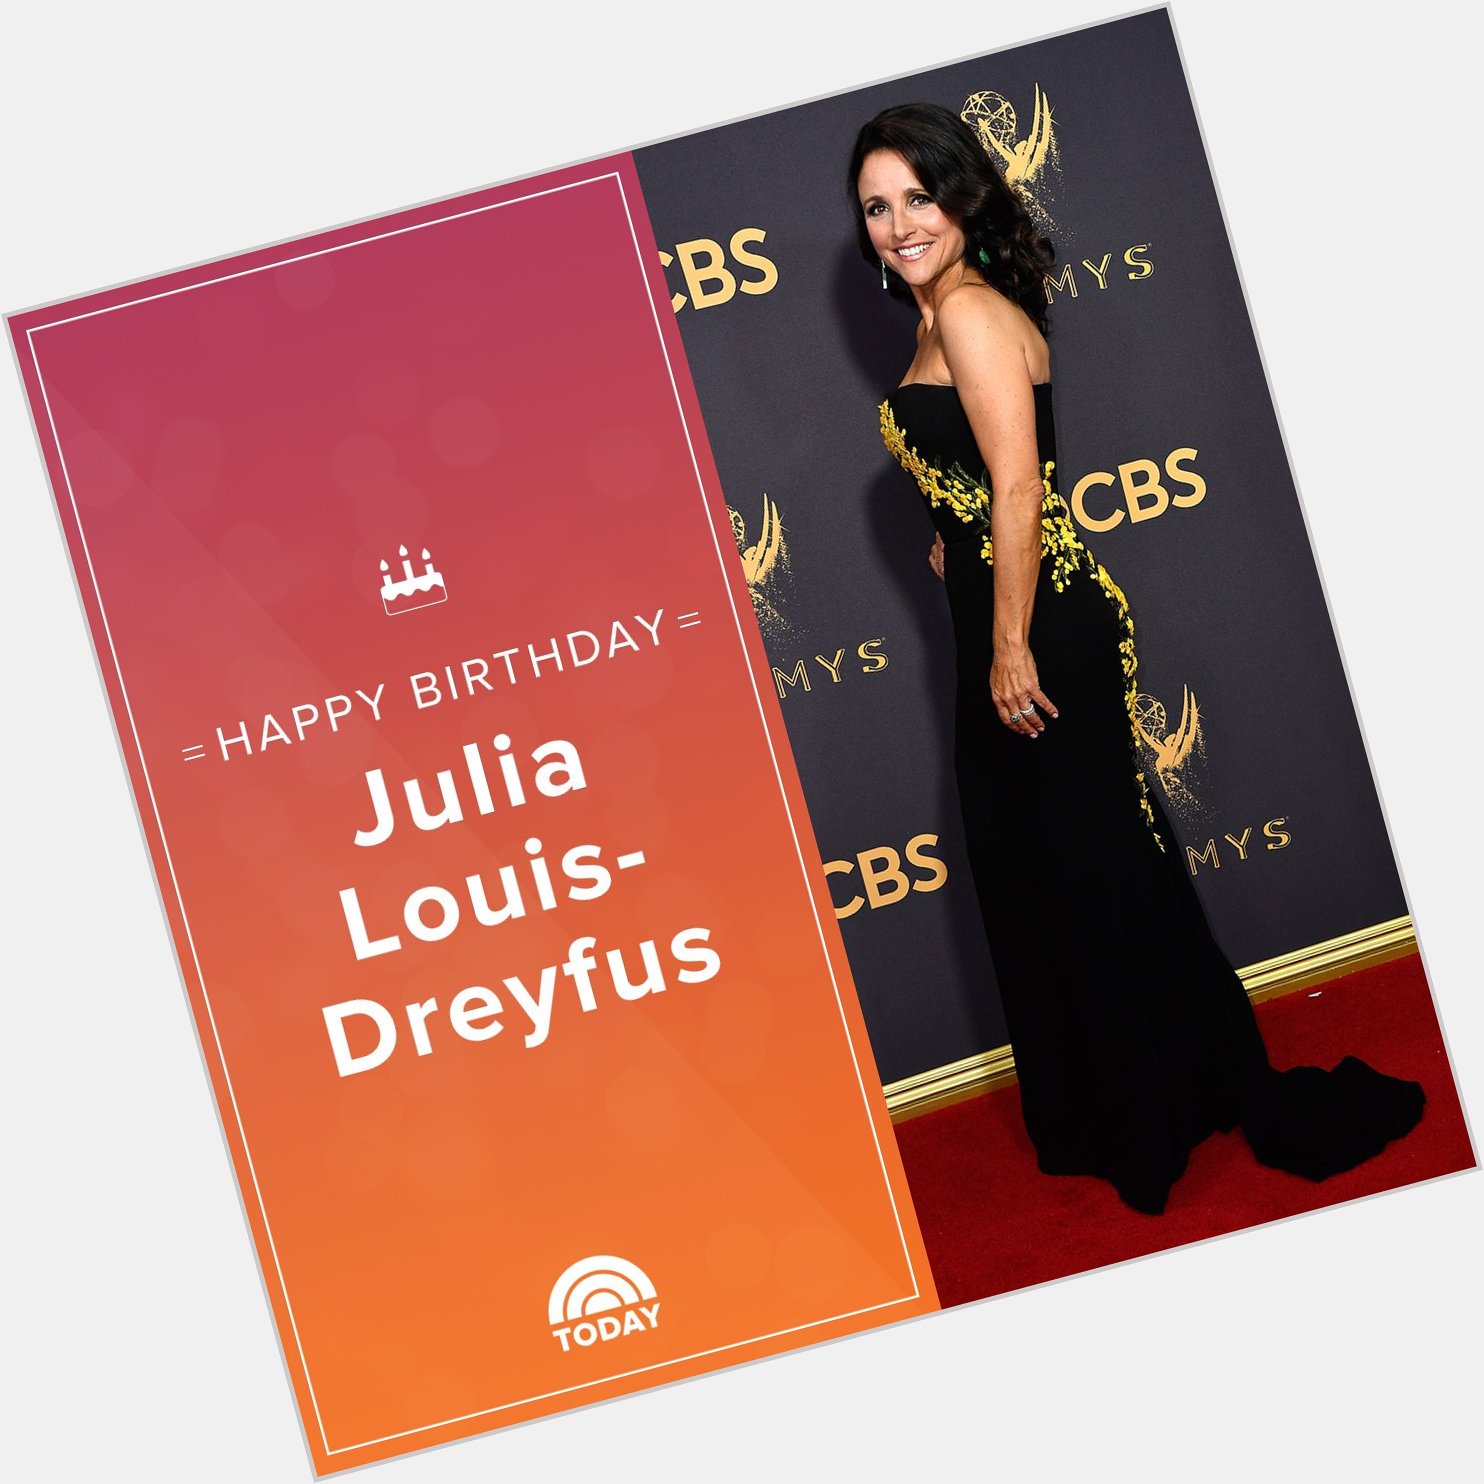 Happy birthday to the lovely Julia Louis-Dreyfus! 